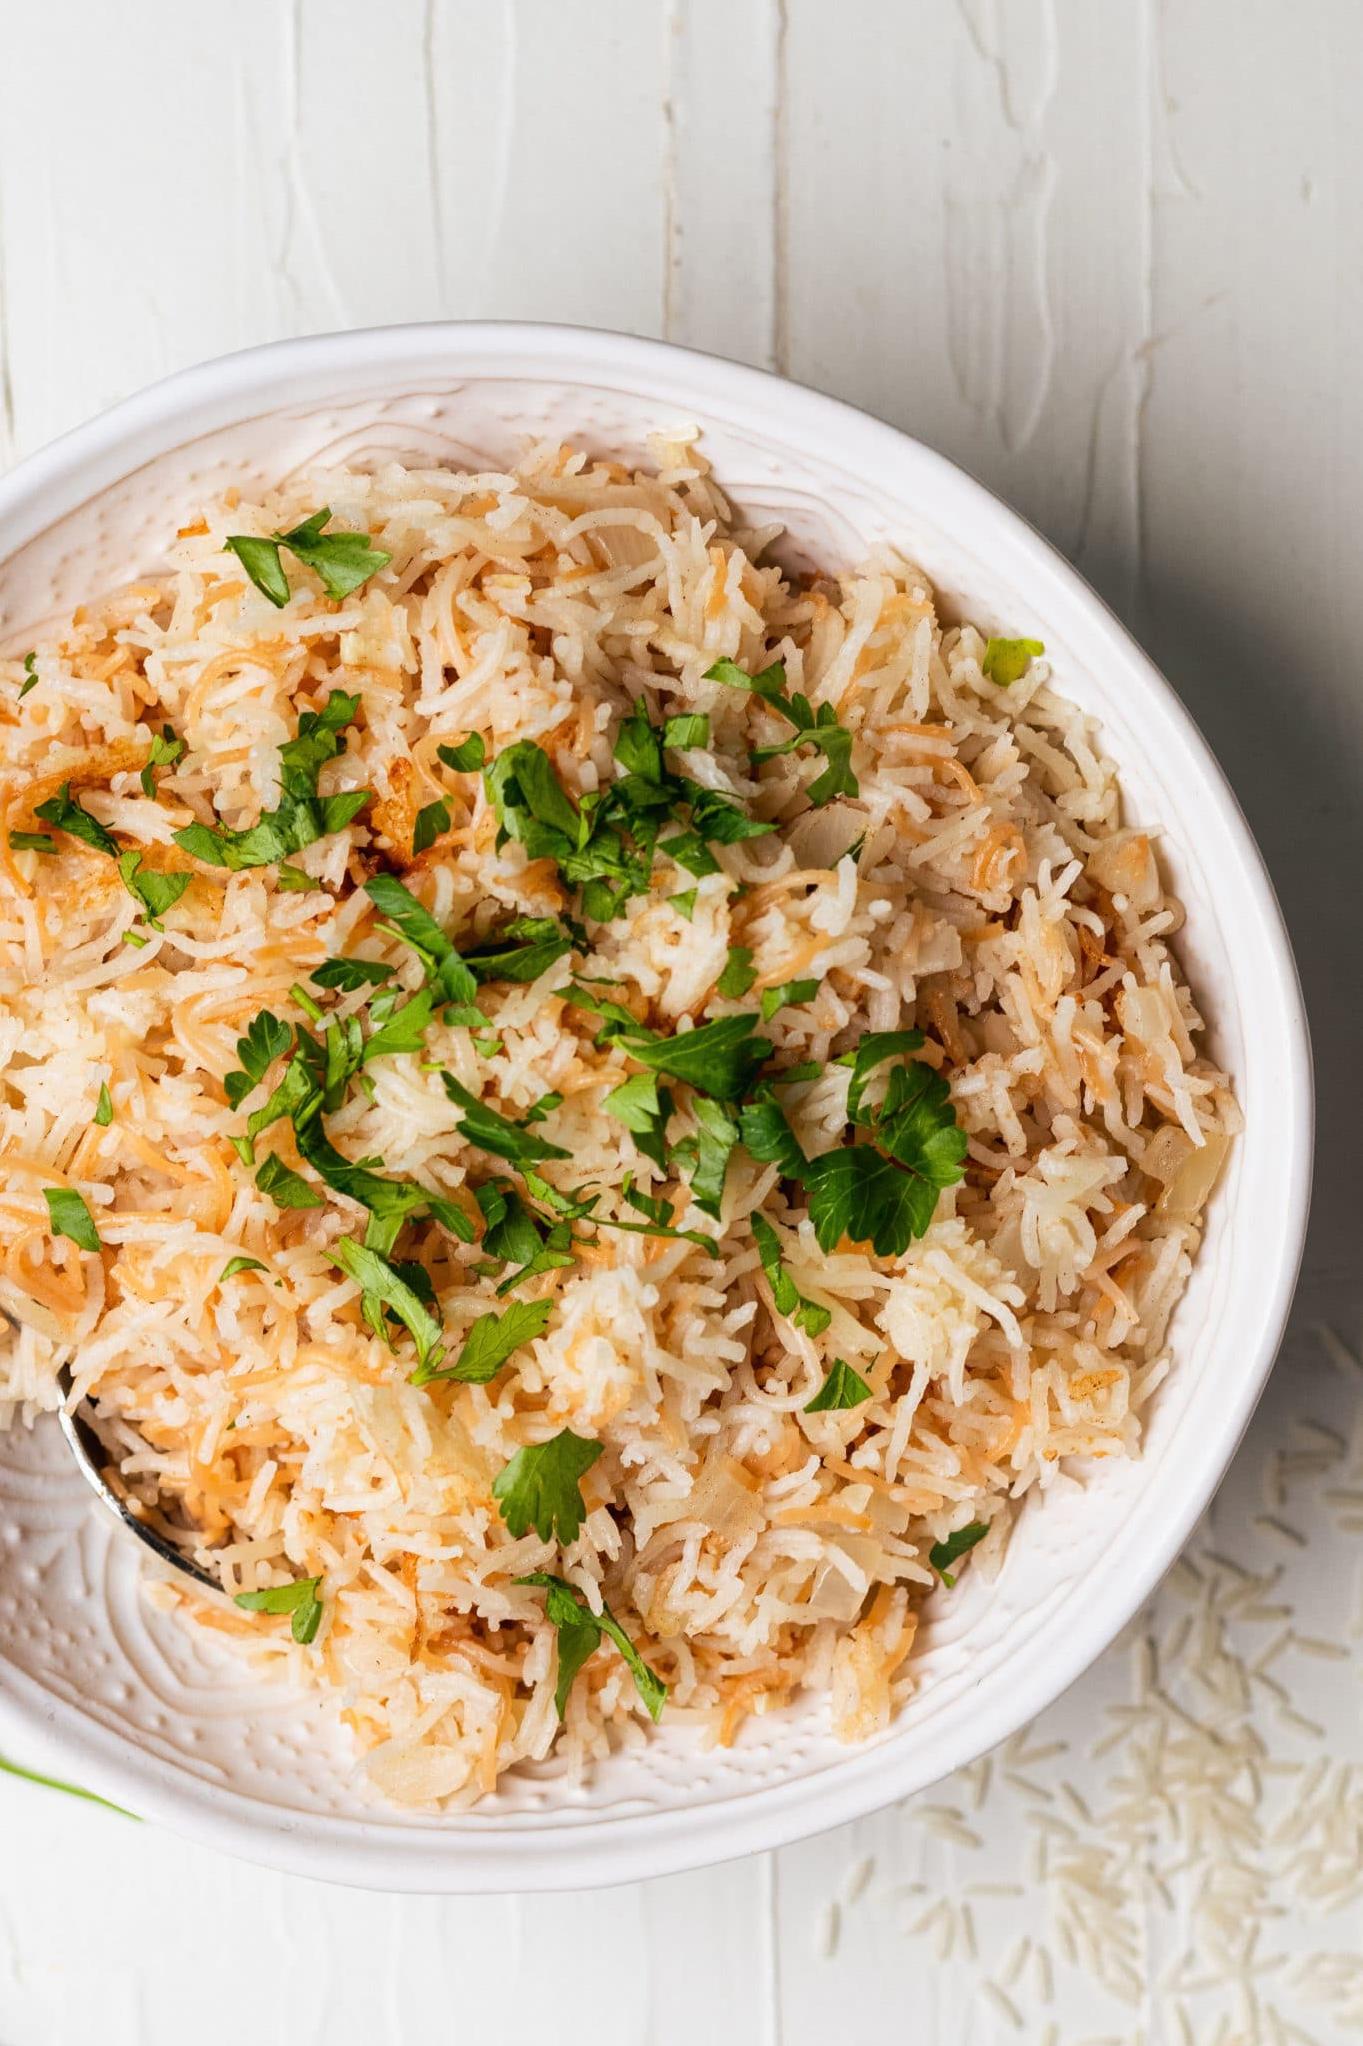  Add some color to your plate with this vibrant rice pilaf.